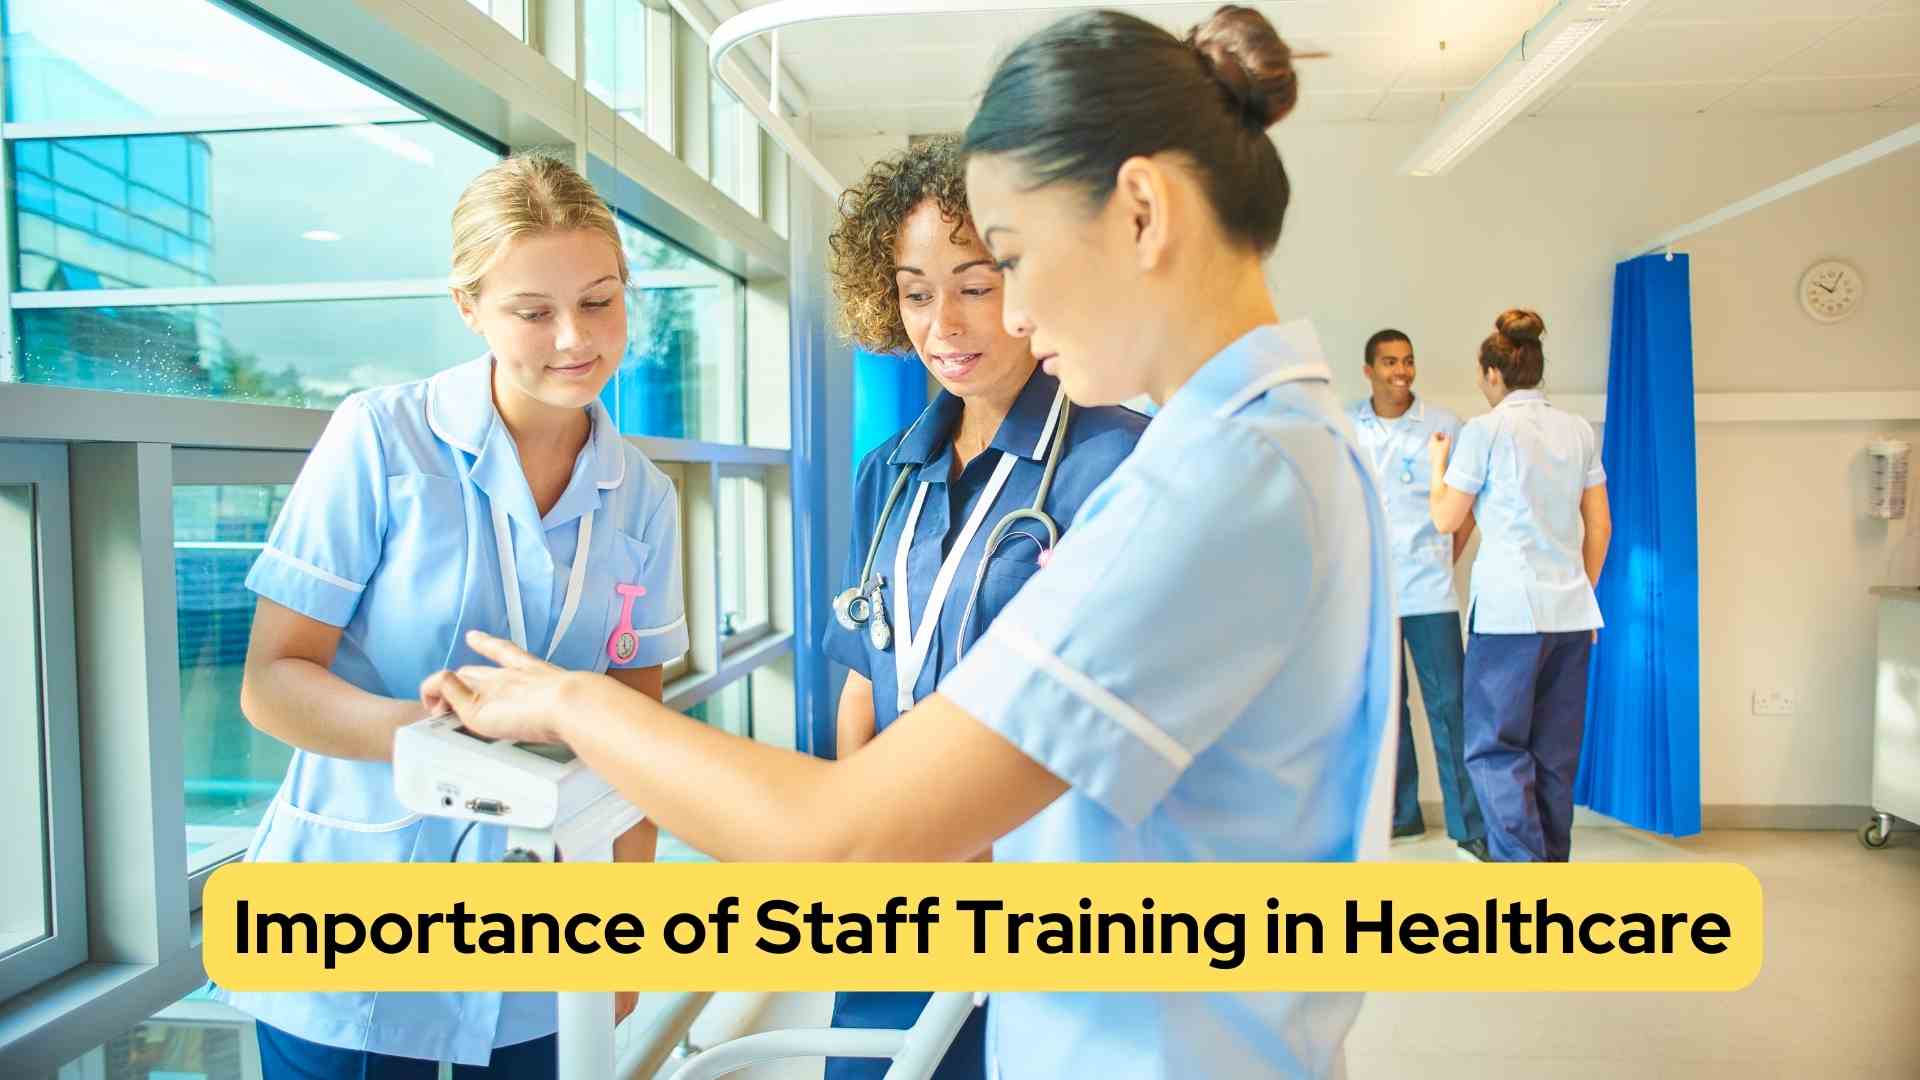 The Importance of Staff Training in Healthcare